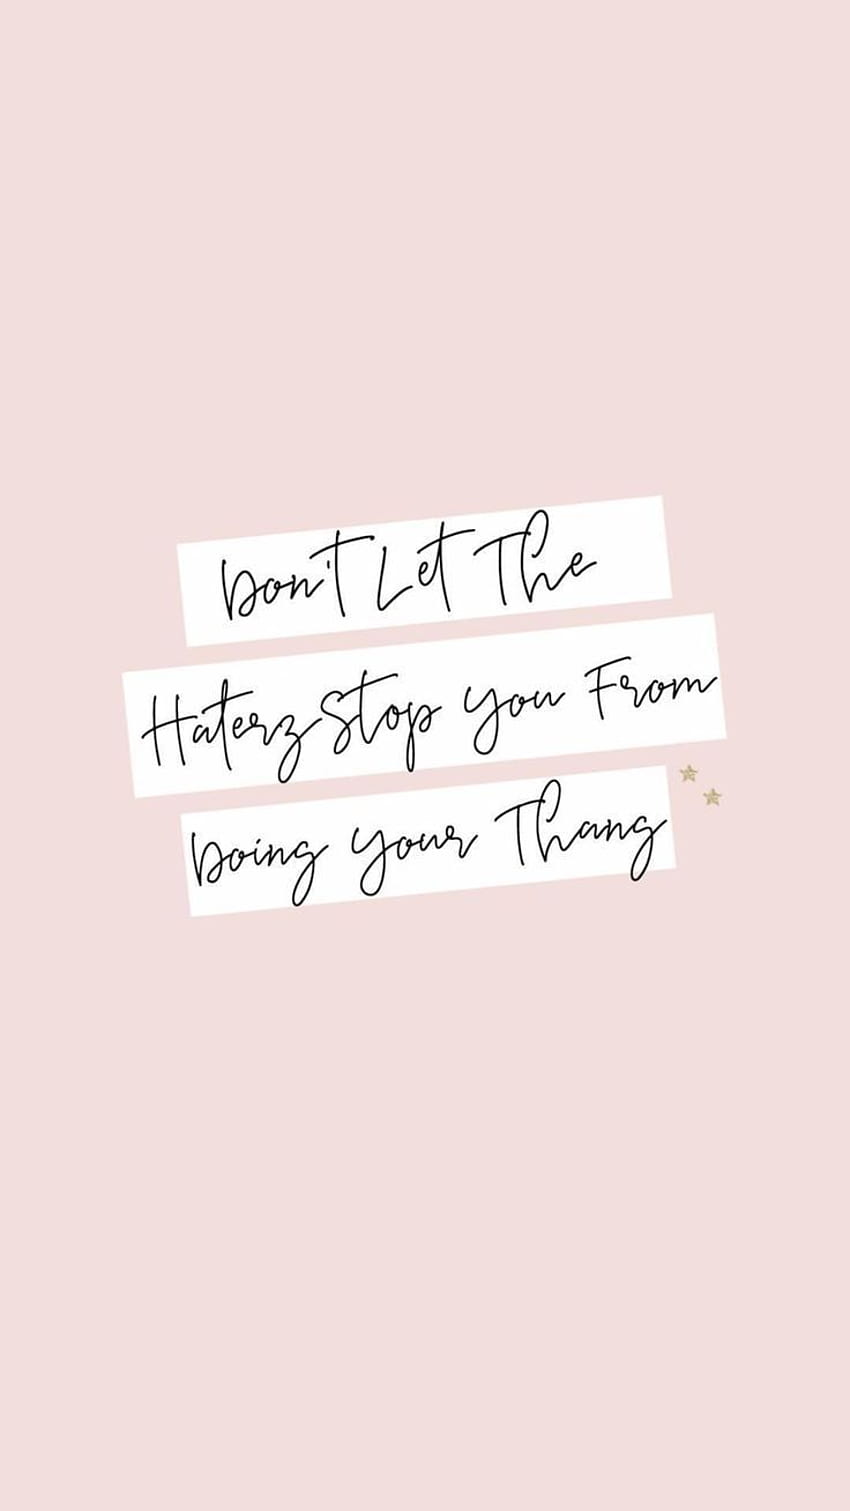 Blog Pixie ⋆ Blogging Tips, Fonts, How To Start A Blog For Beginners. Mean girl quotes, iPhone quotes girly, Phone quotes HD phone wallpaper